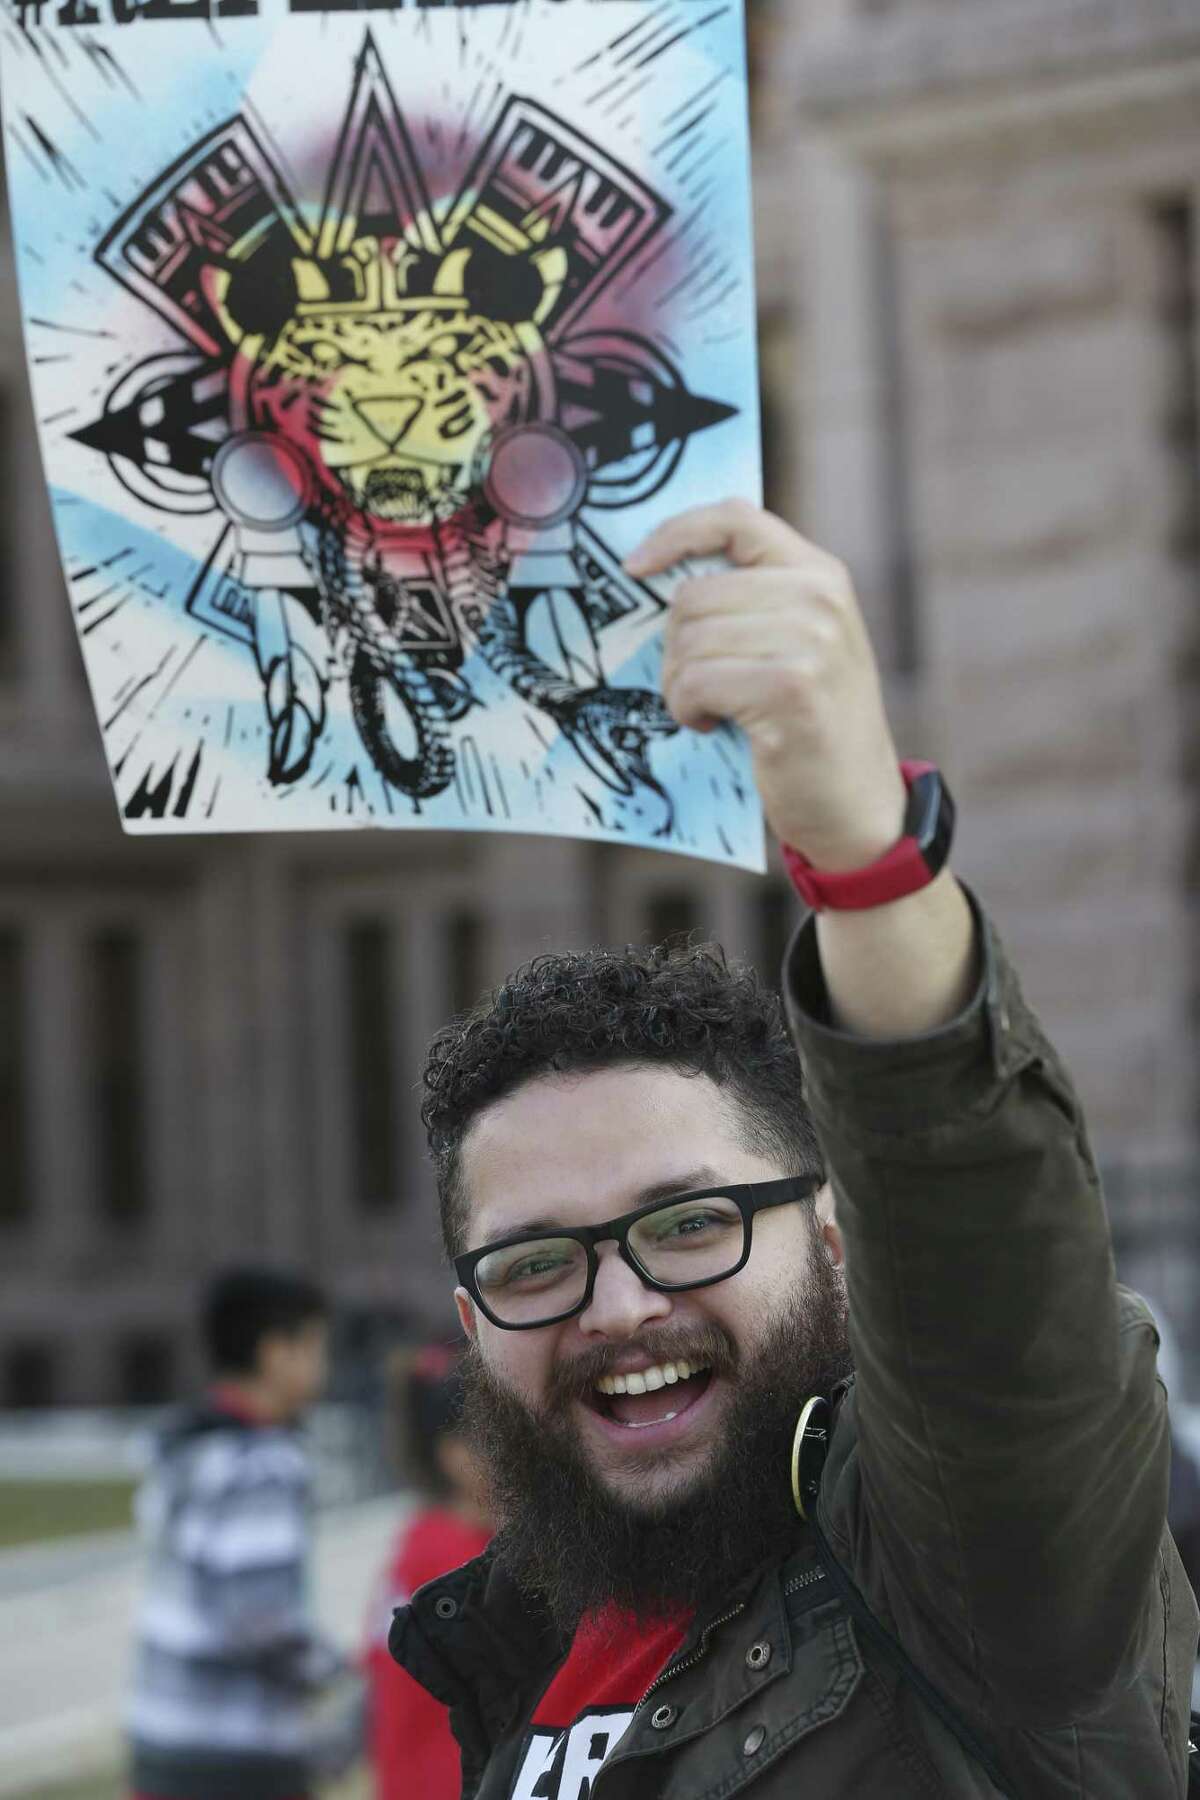 Chele Iglesias, of Houston, joins other for a Fuerza Texas rally at the State Capitol, Monday, Feb. 25, 2019. The group is calling for the repeal of SB4. The bill was passed by the Texas legislature during the last session and bans sanctuary cities in the state. Texas State Sen. Jose Menendez, D-San Antonio, and State Rep. Rafael Anchia, D-Dallas, have introduced bills repealing SB4.